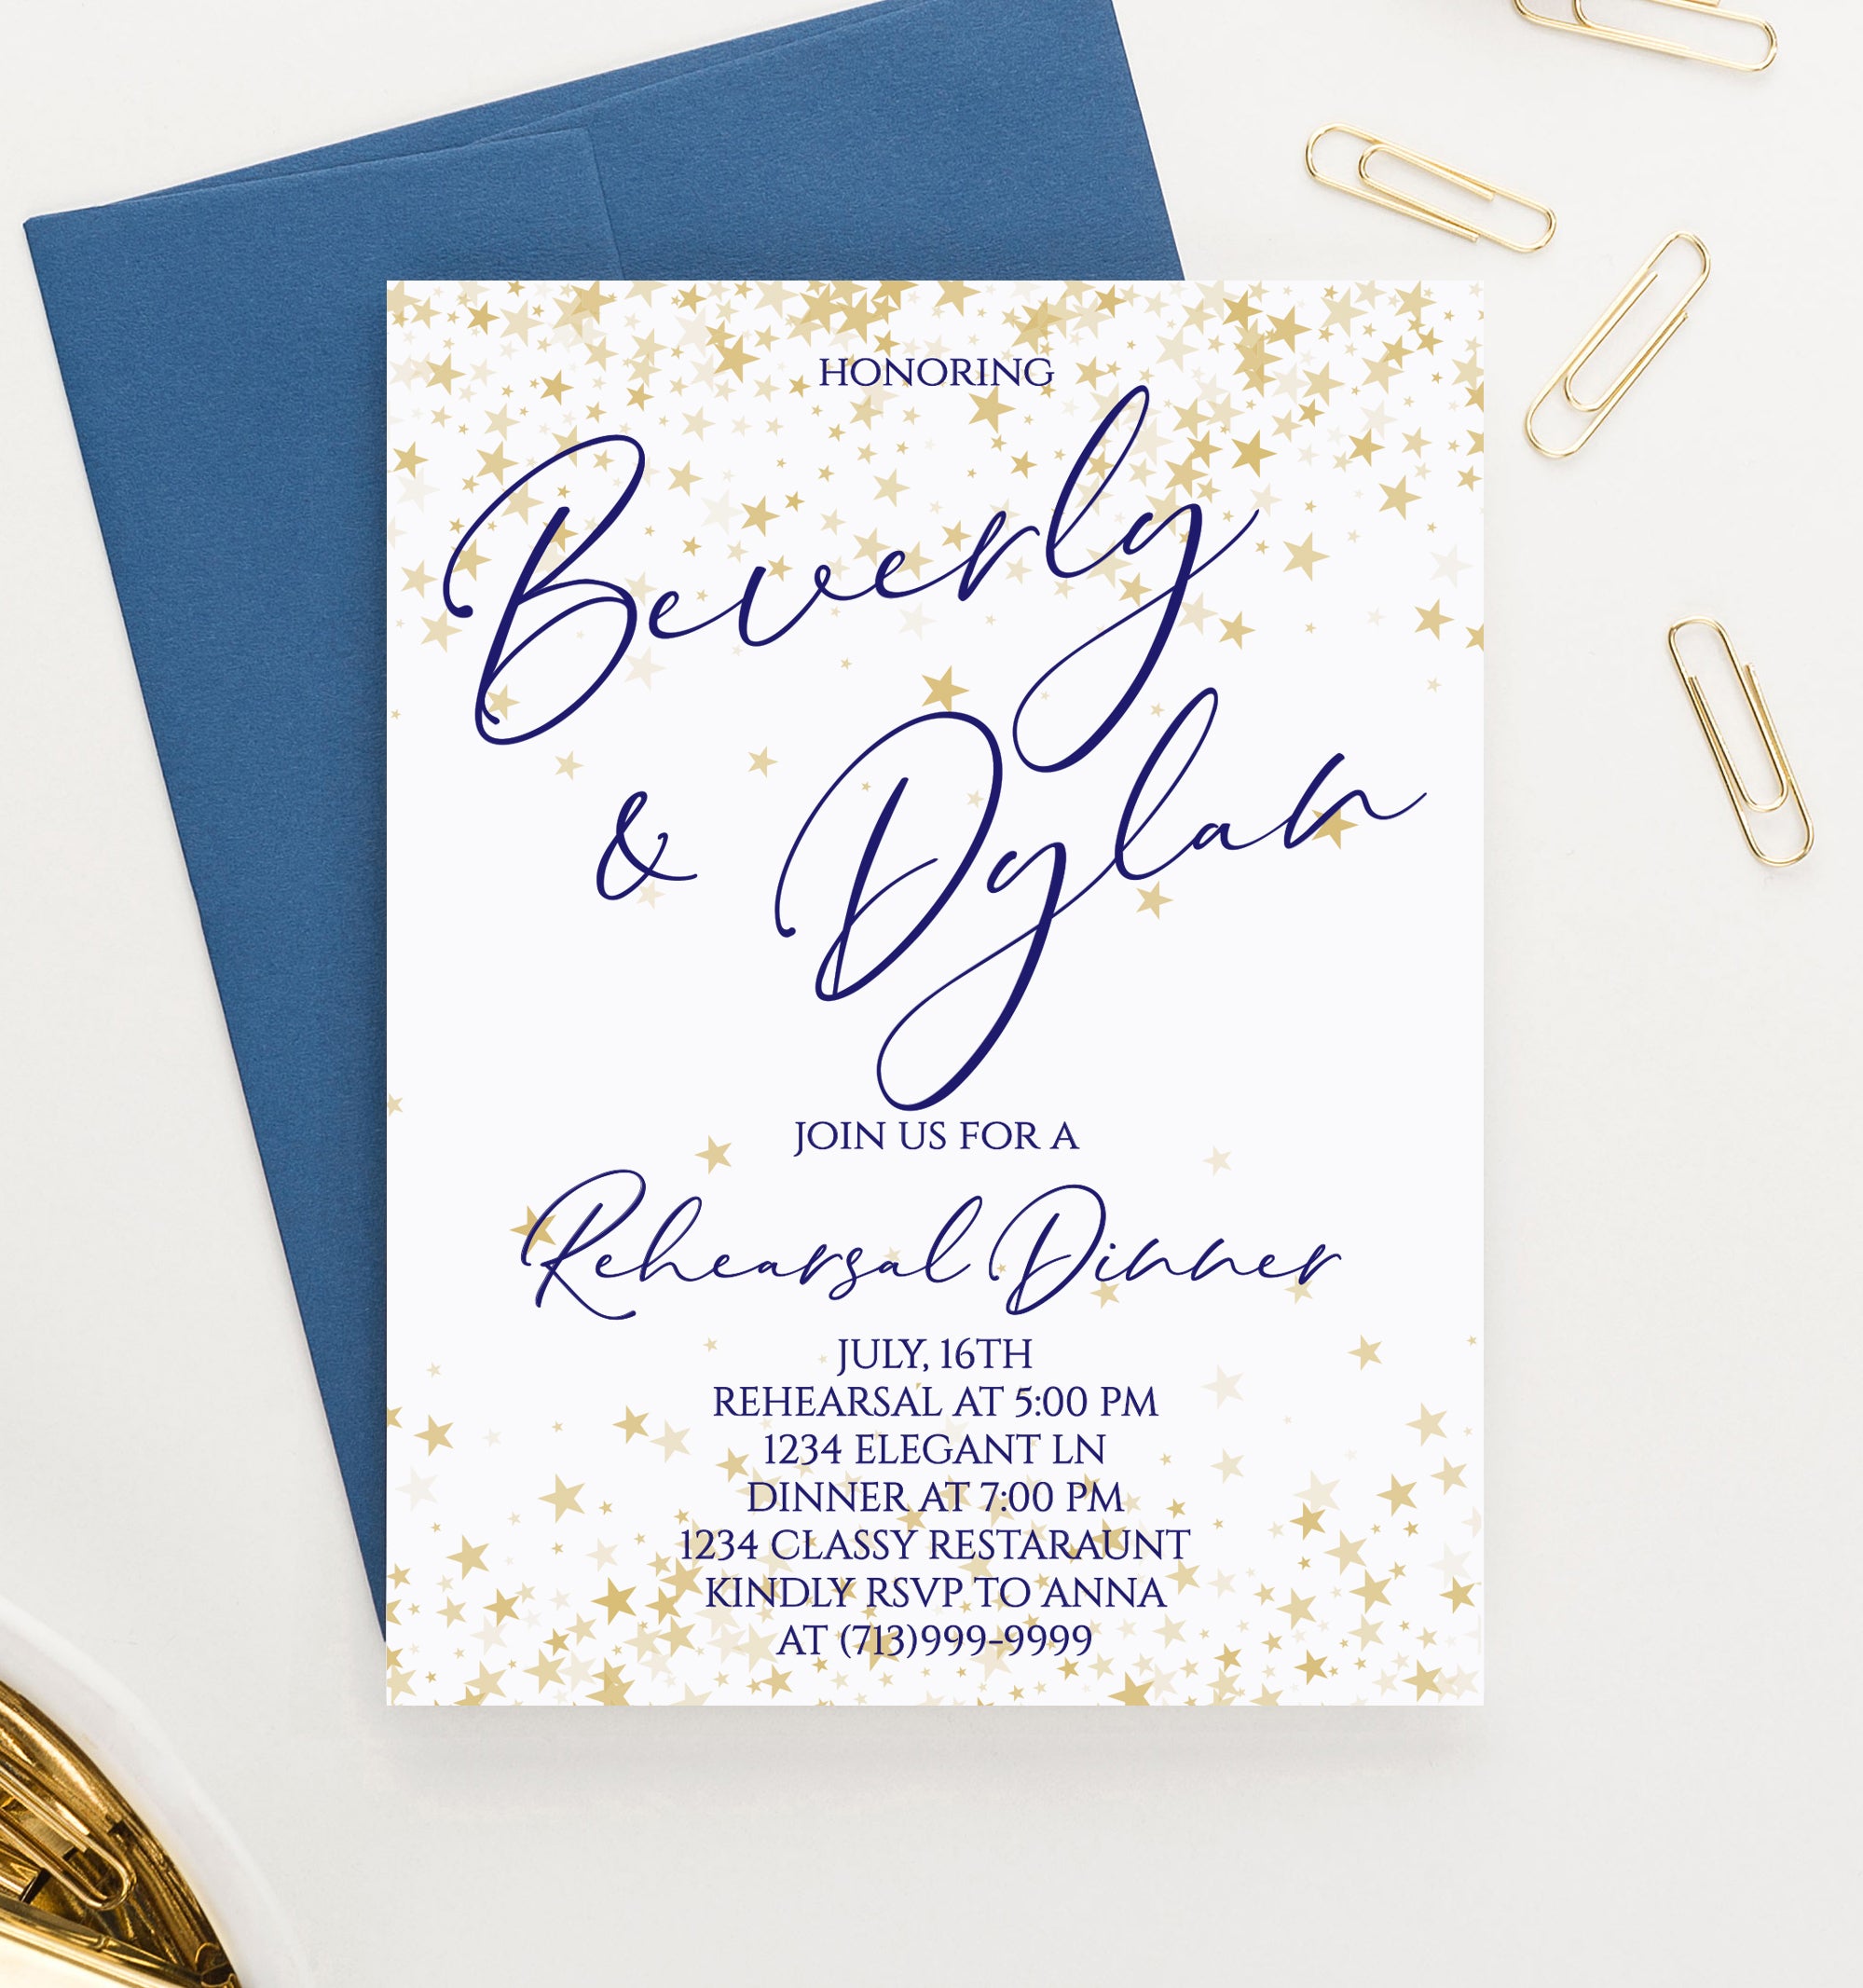 Personalized Rehearsal Dinner Invitations With Gold Stars